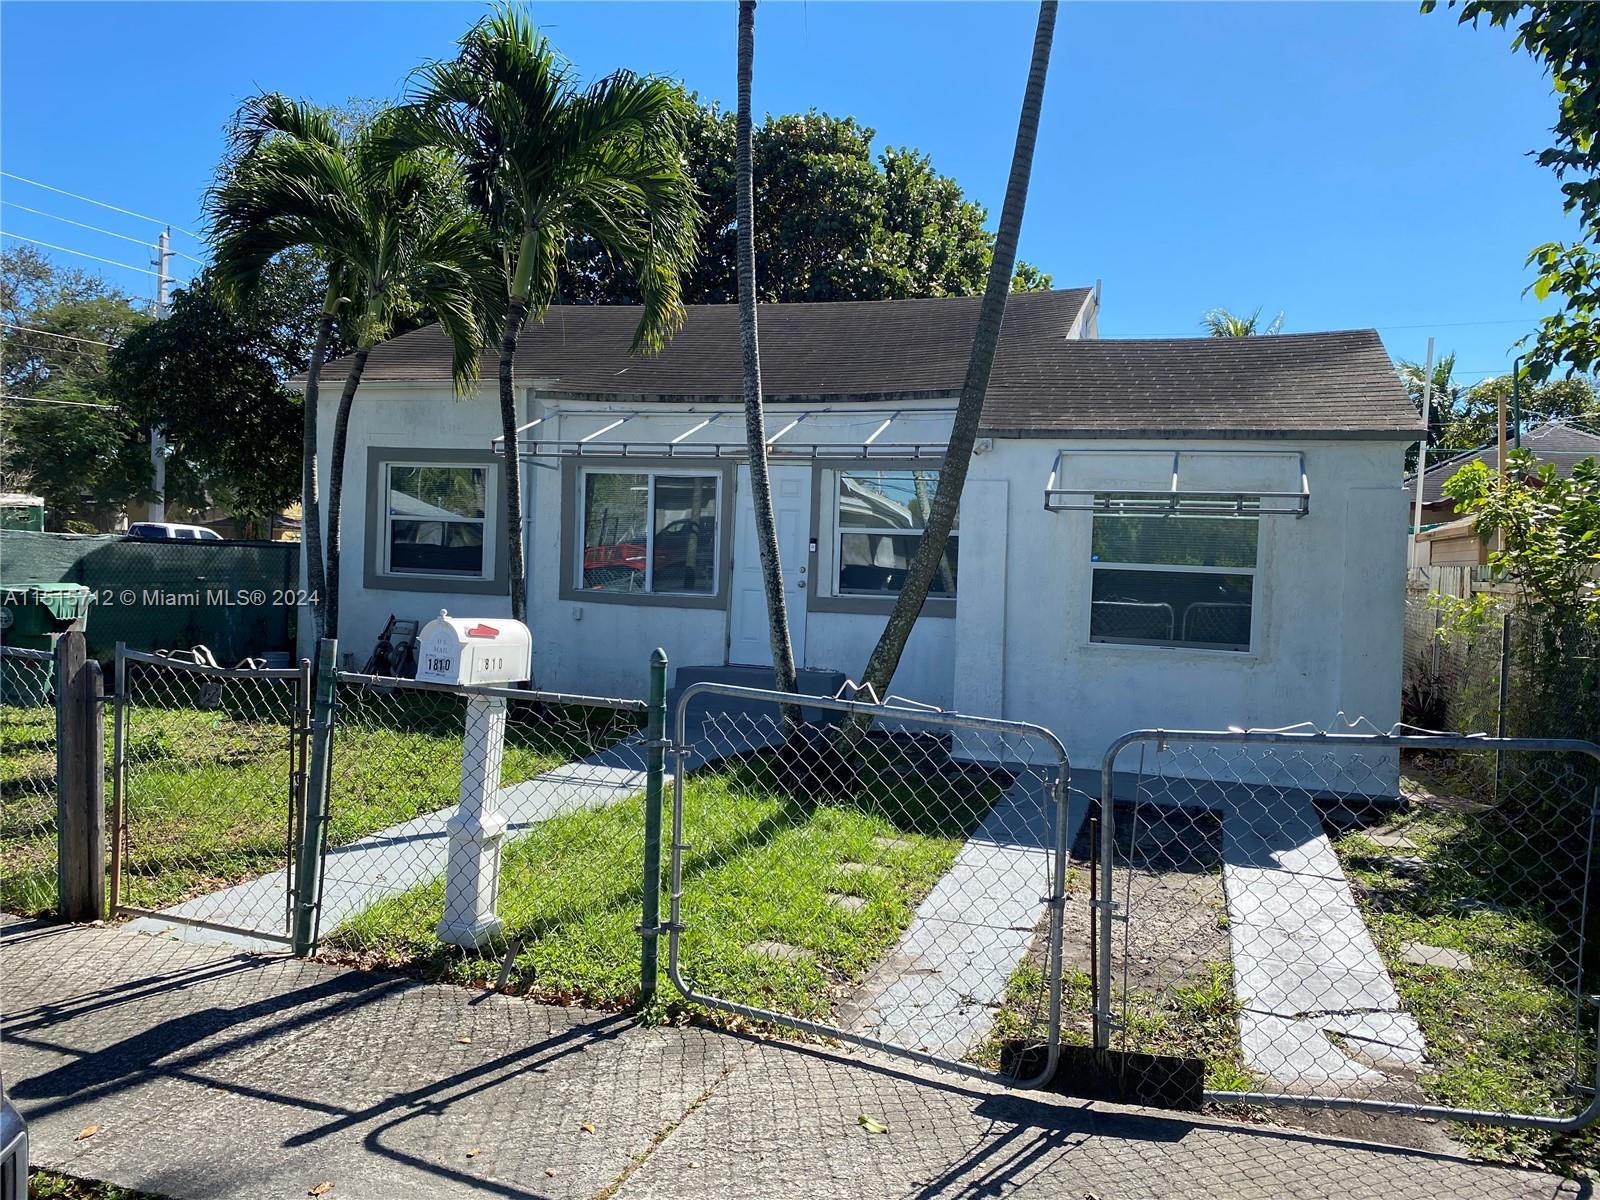 Photo of 1810 NW 47th St in Miami, FL